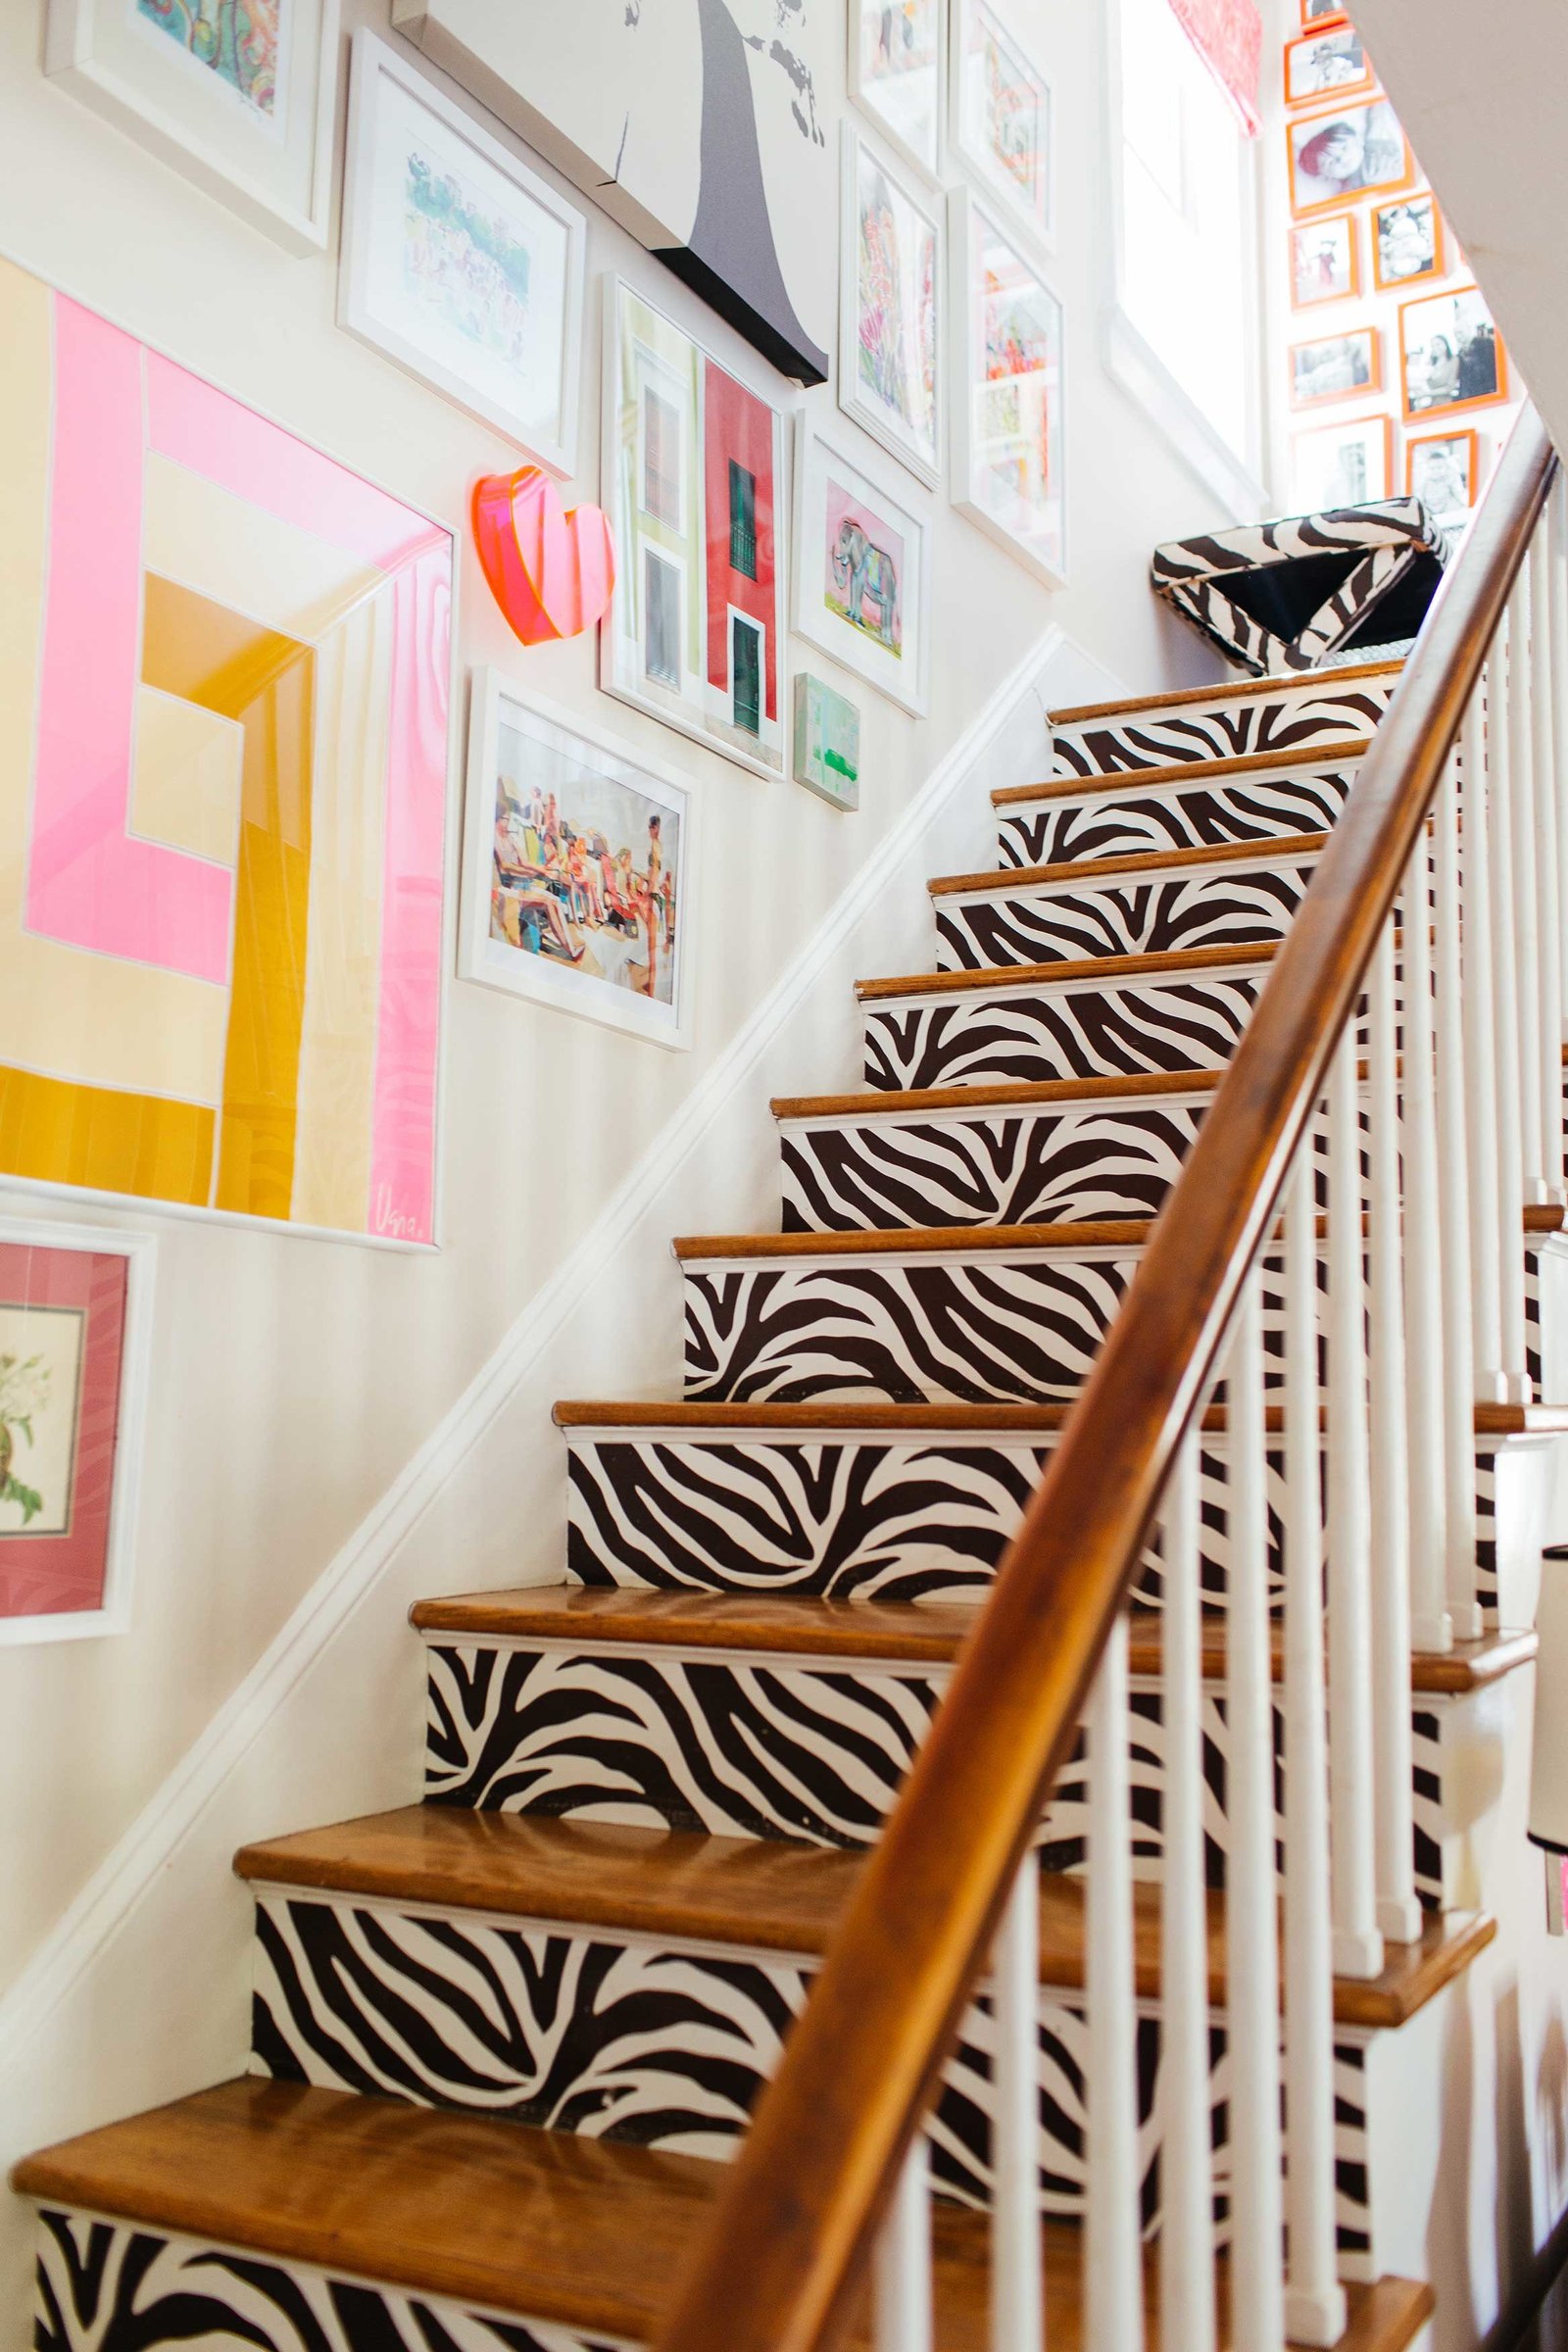 A zebra staircase with a gallery wall of art and photos.